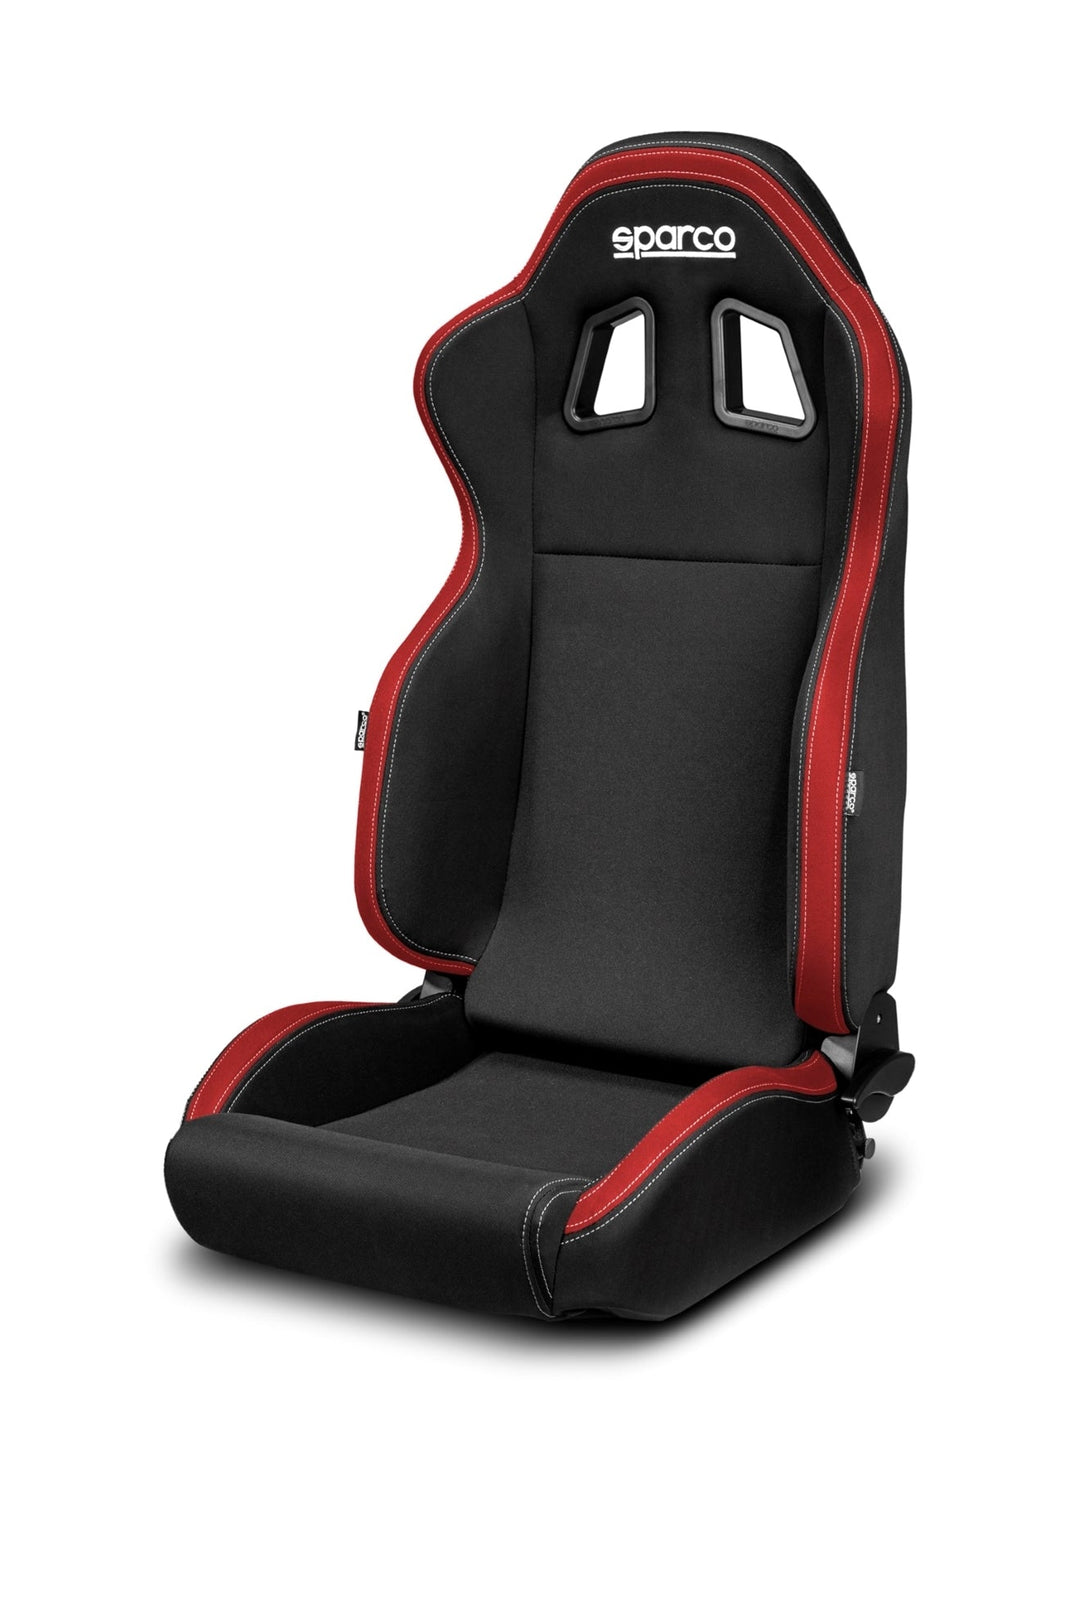 Sparco R100 Reclinable Steel Model Seat Black/Red - Universal - Dirty Racing Products